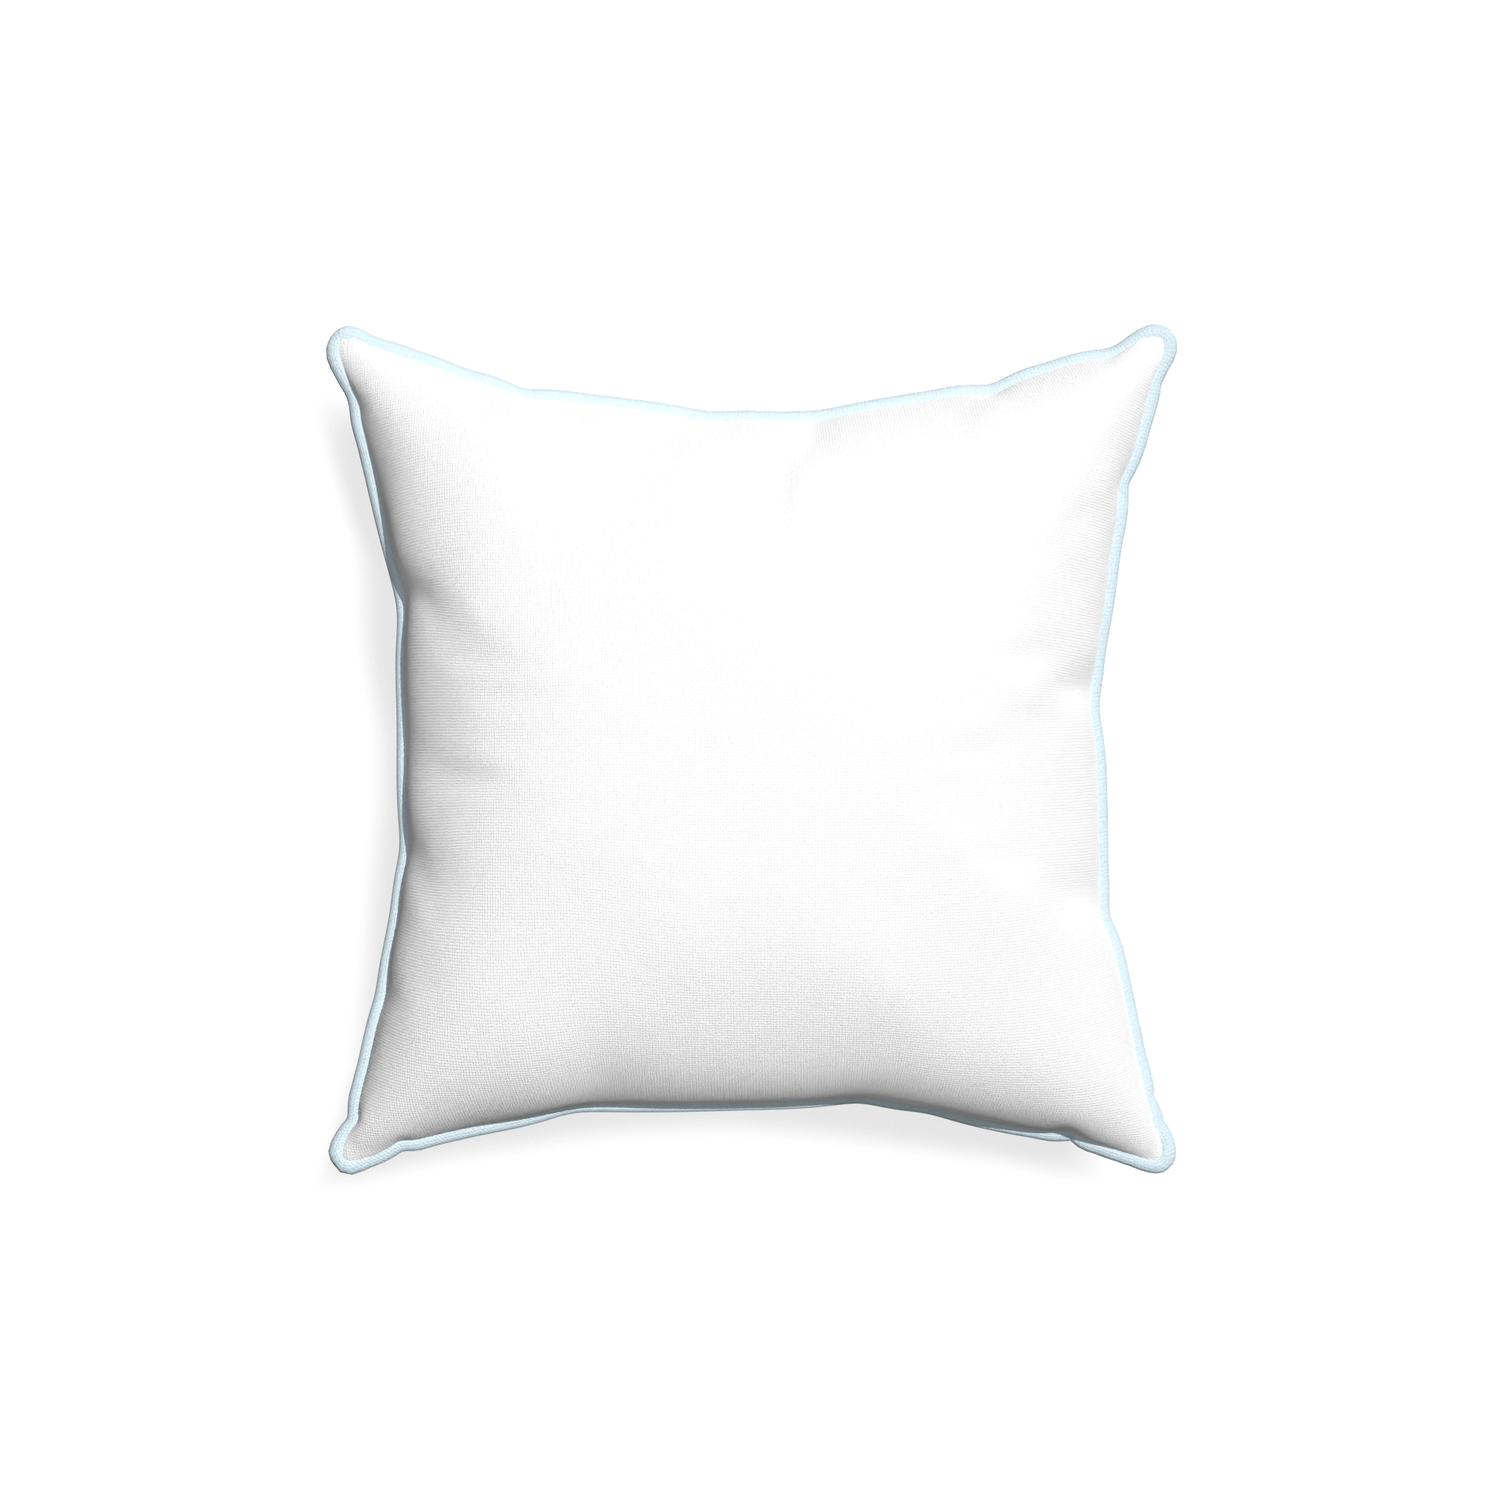 18-square snow custom pillow with powder piping on white background